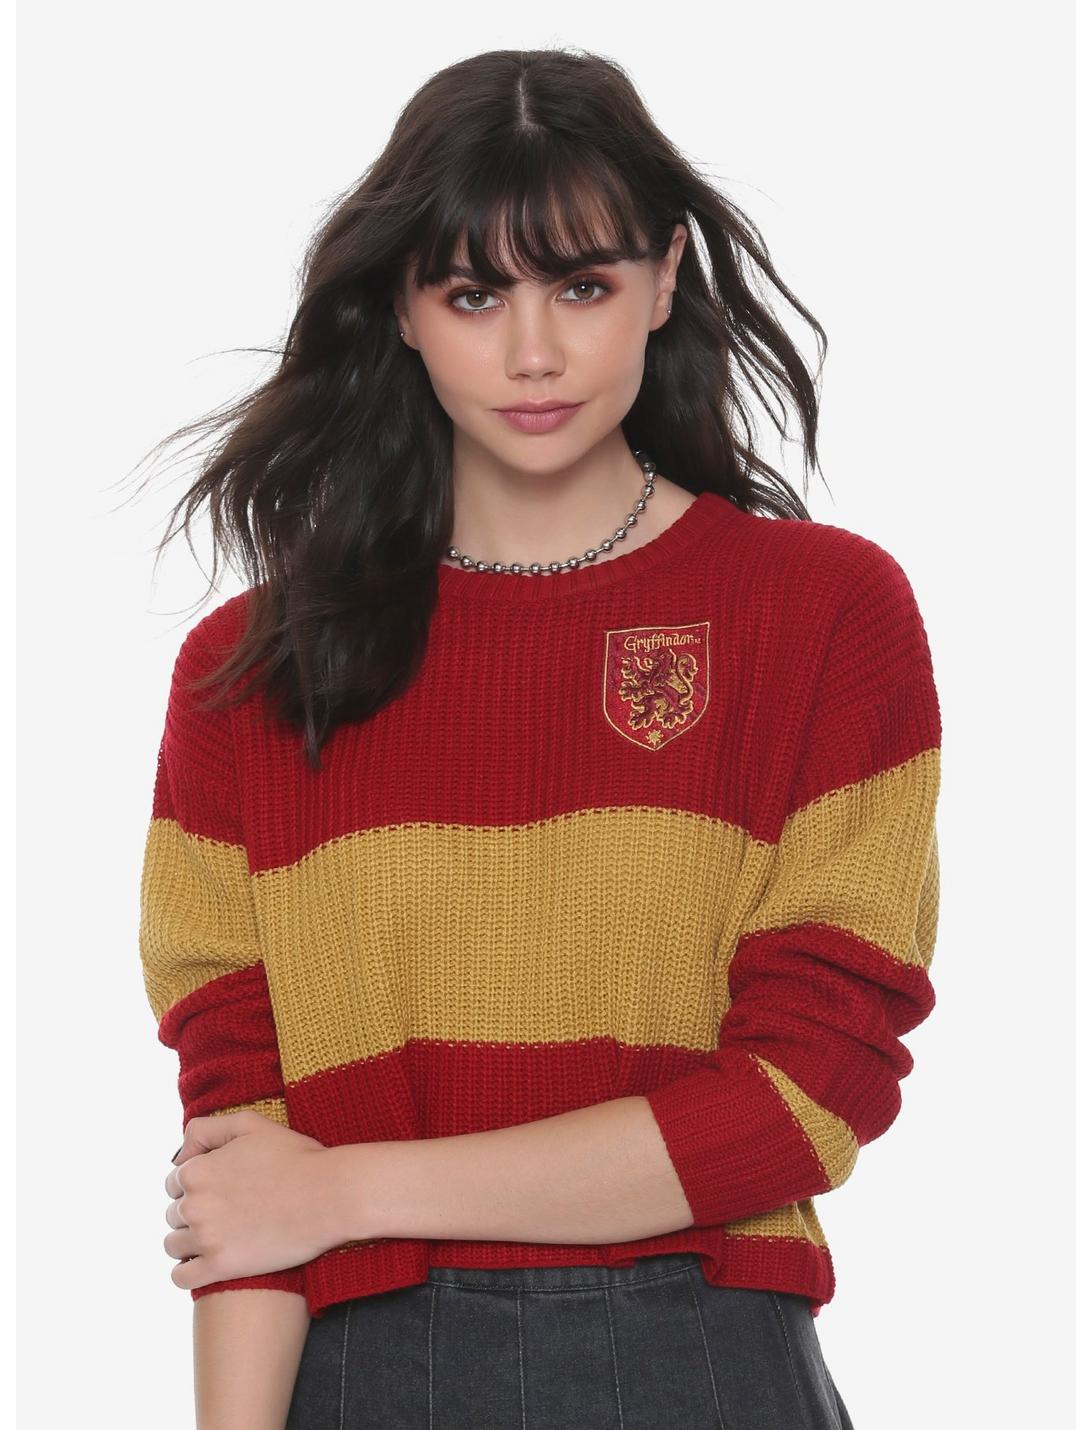 Kaap Portugees Rudyard Kipling Harry Potter Gryffindor Girls Quidditch Sweater | Hot Topic